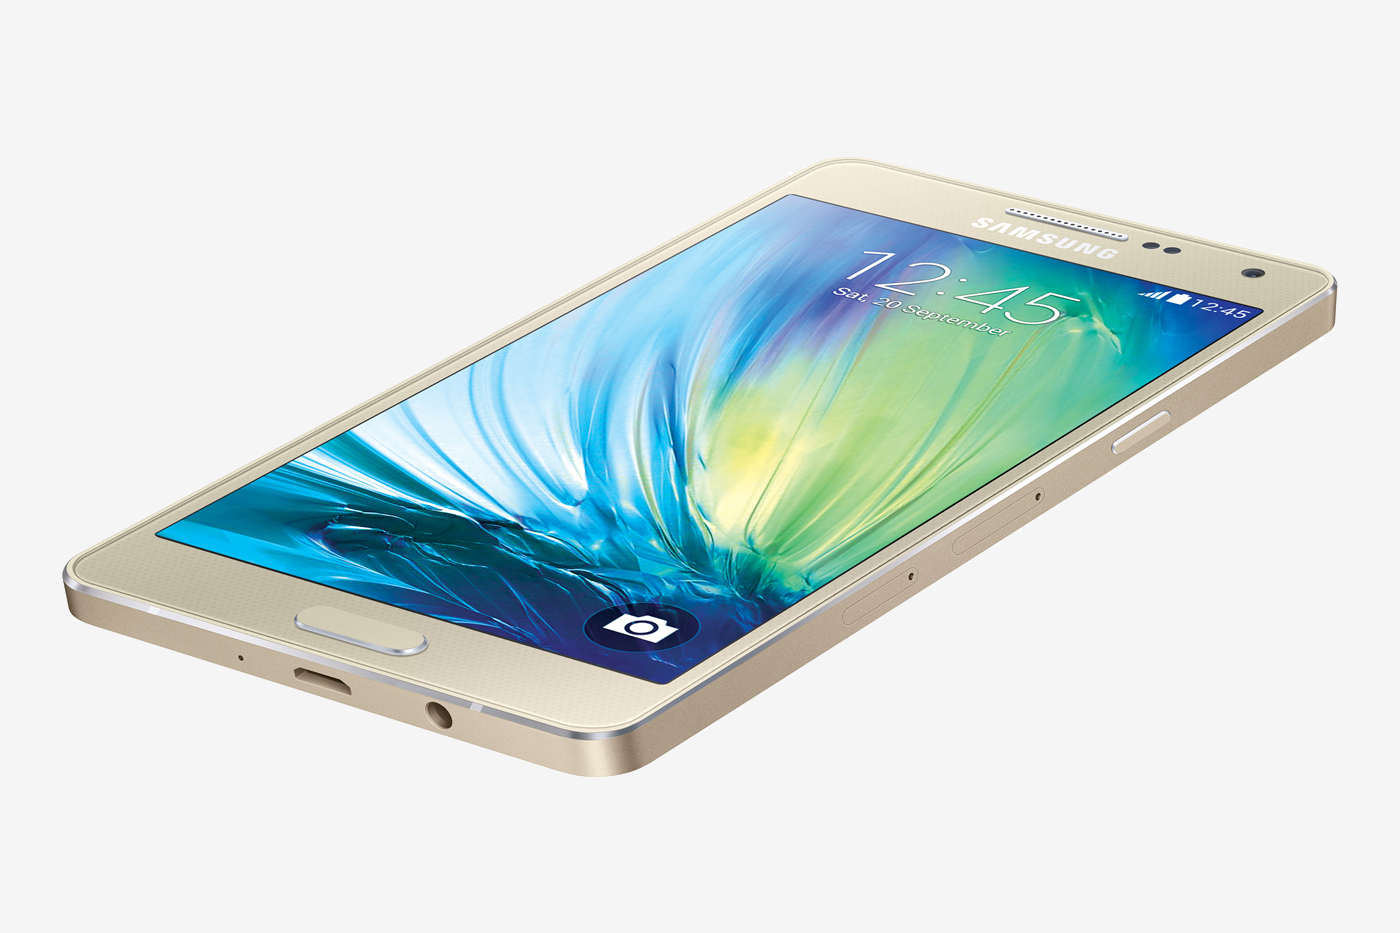 samsung announces the galaxy a5 and a3 with full metal unibody designs